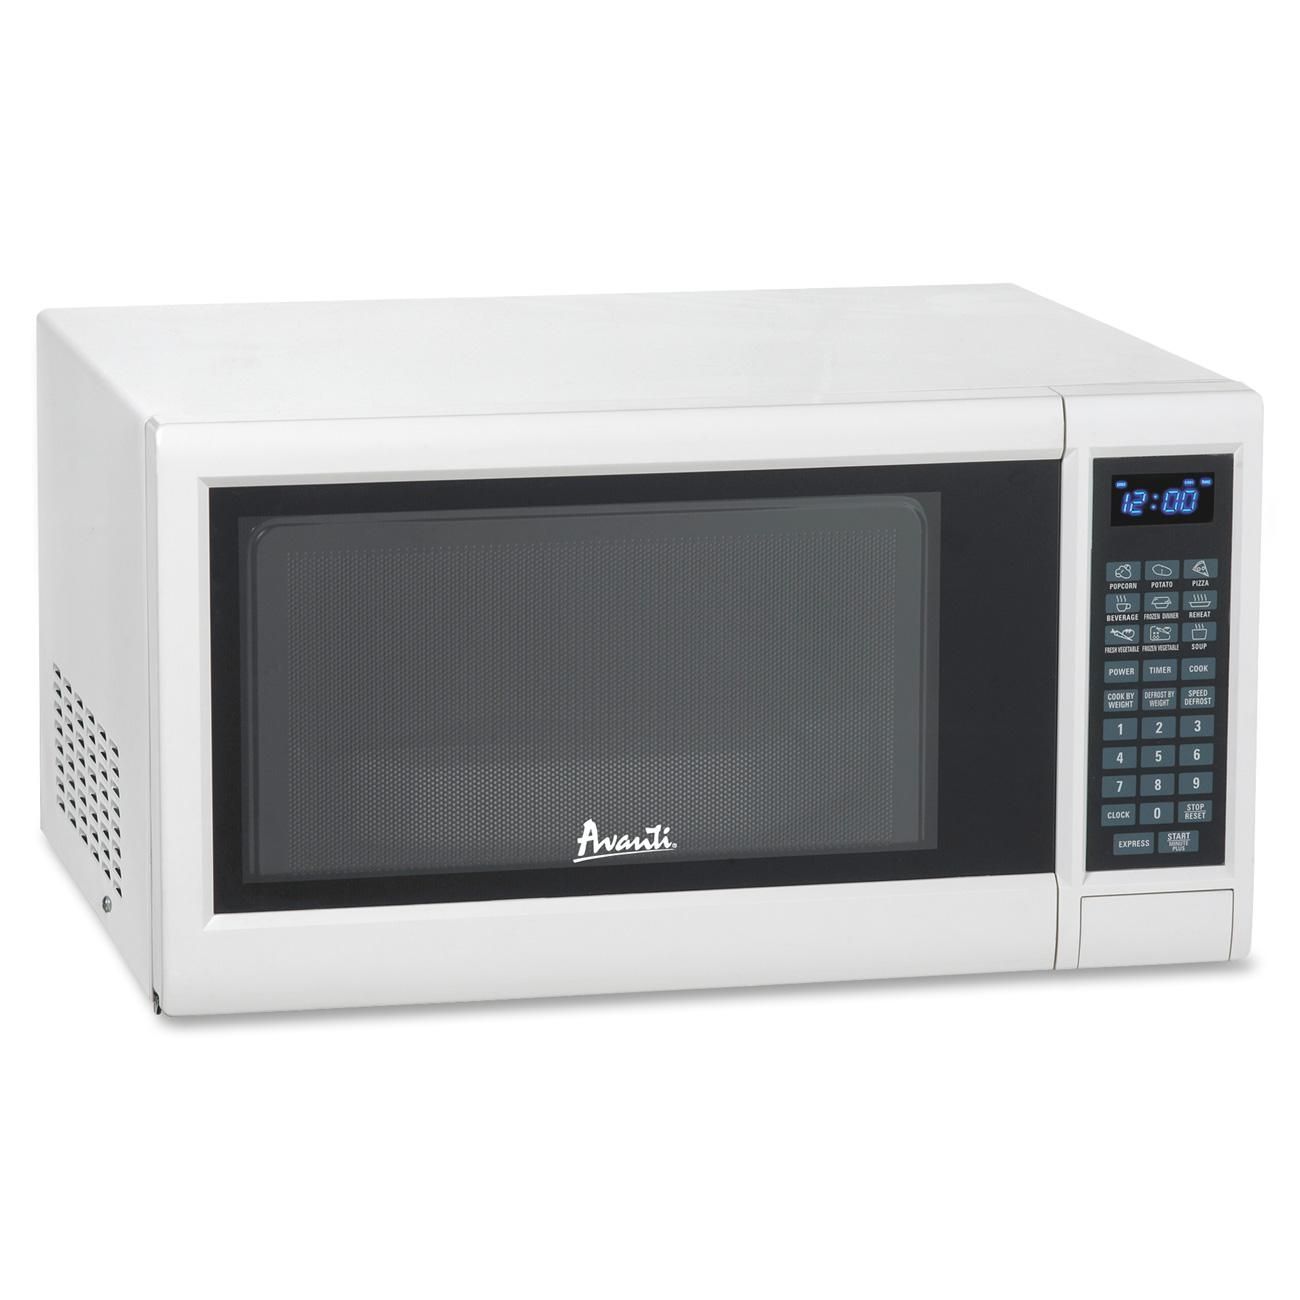 1.2 Cubic Foot 1000W Microwave